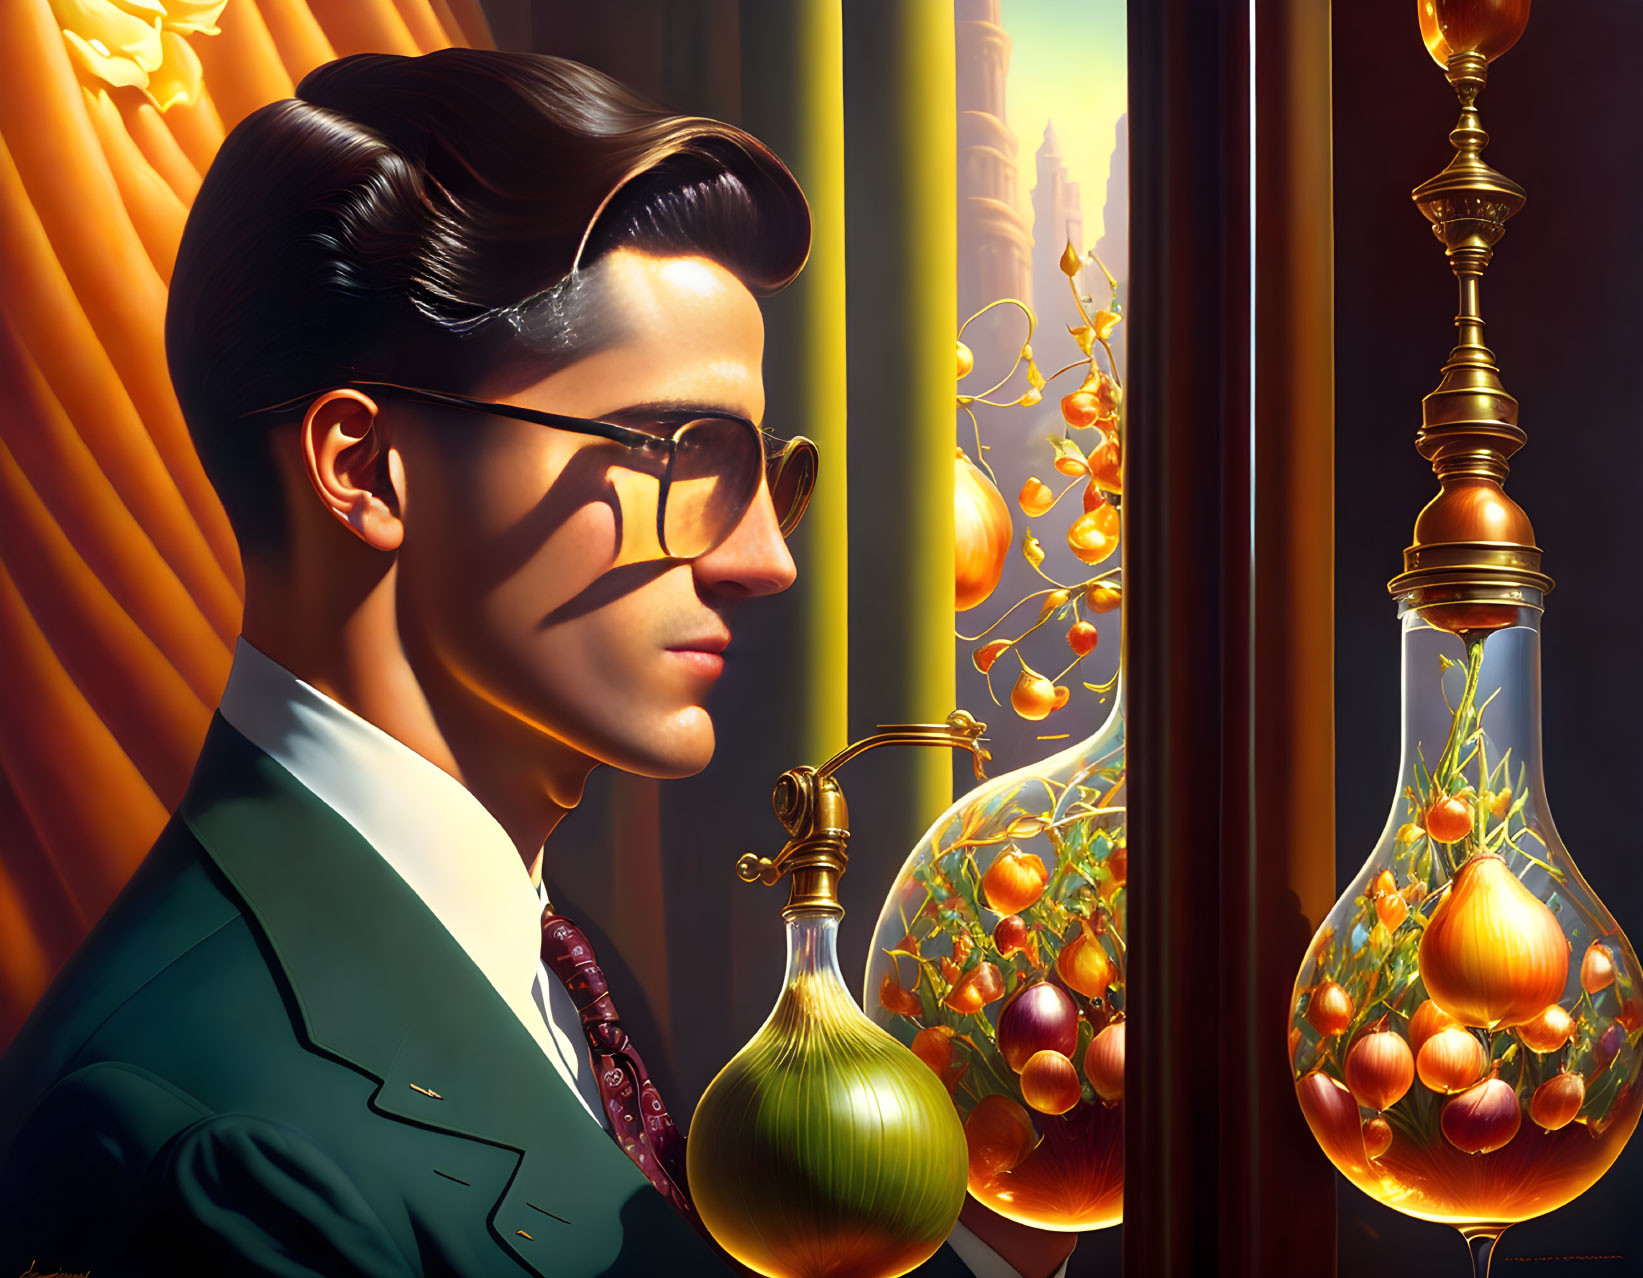 Stylized portrait of man with sleek hair and glasses gazing at floating terrariums on warm